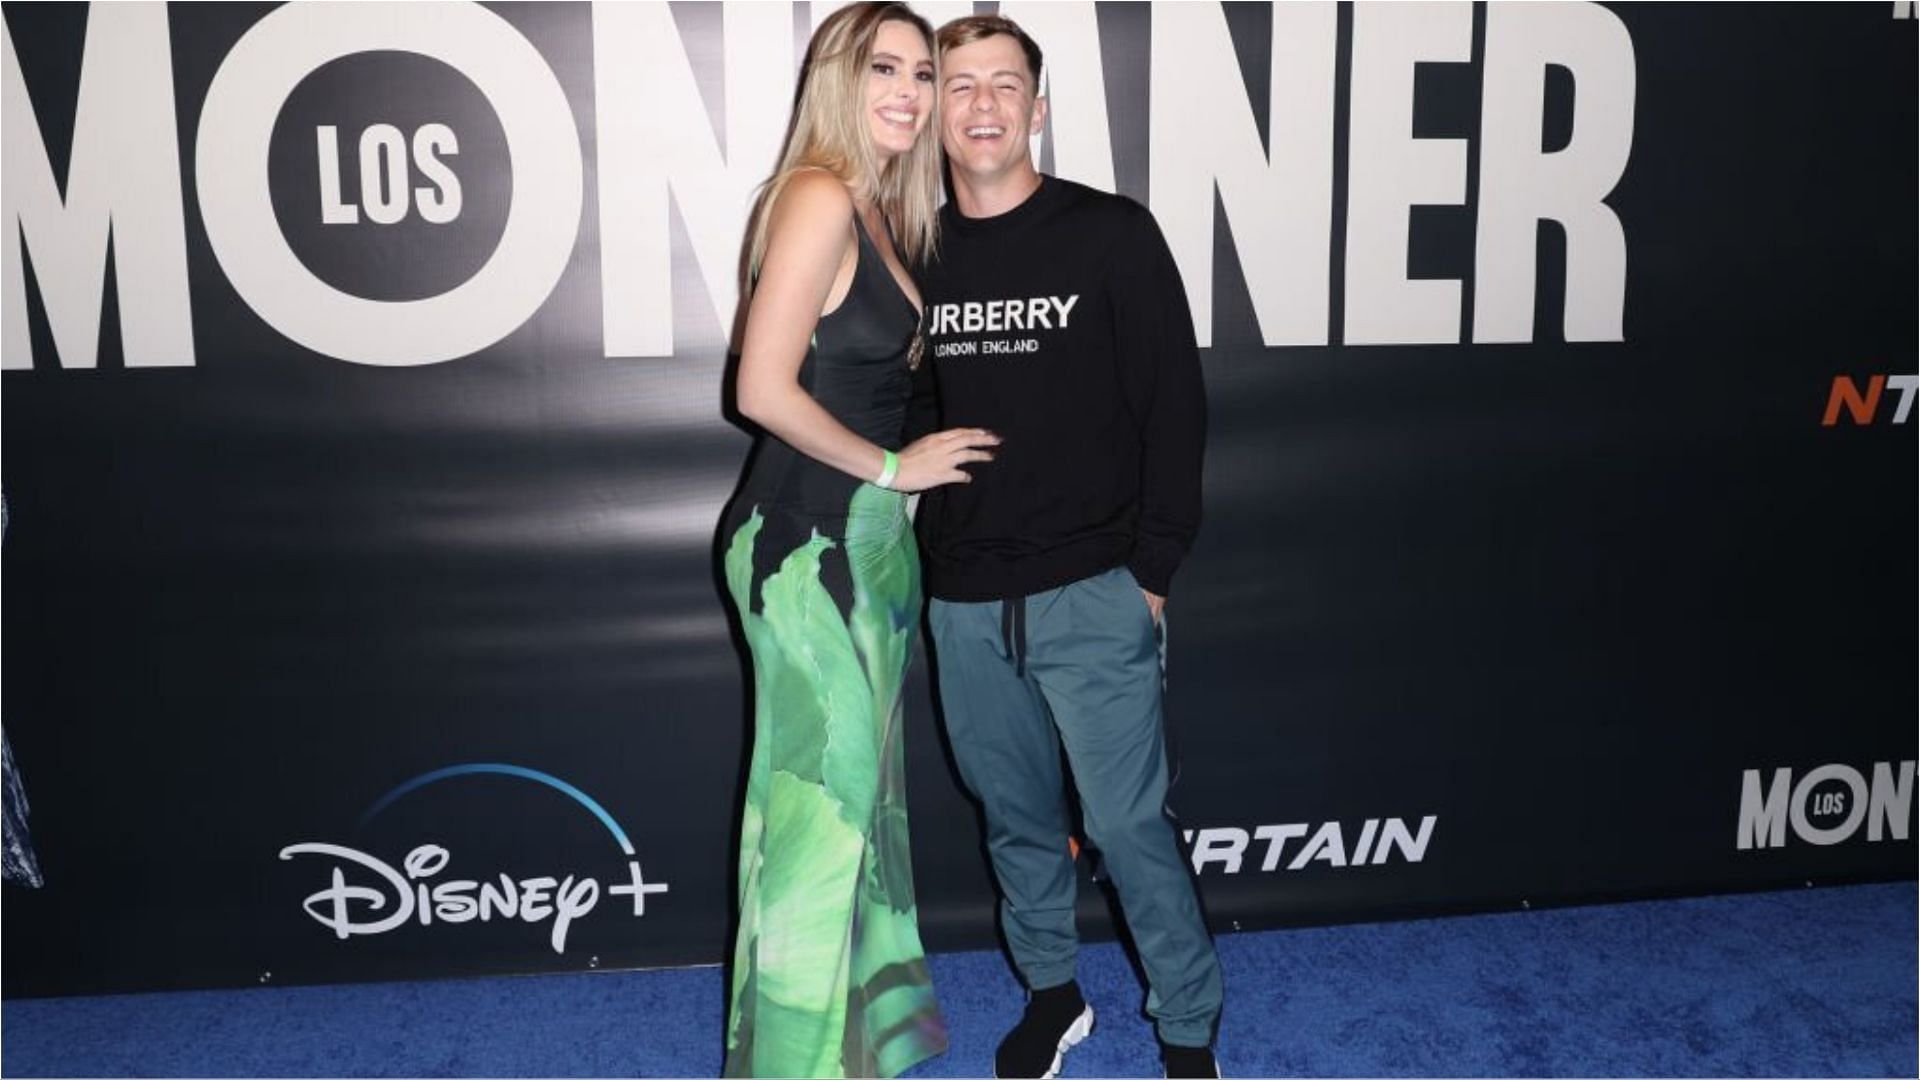 Lele Pons and Guaynaa have been romantically linked since 2020 (Image via John Parra/Getty Images)